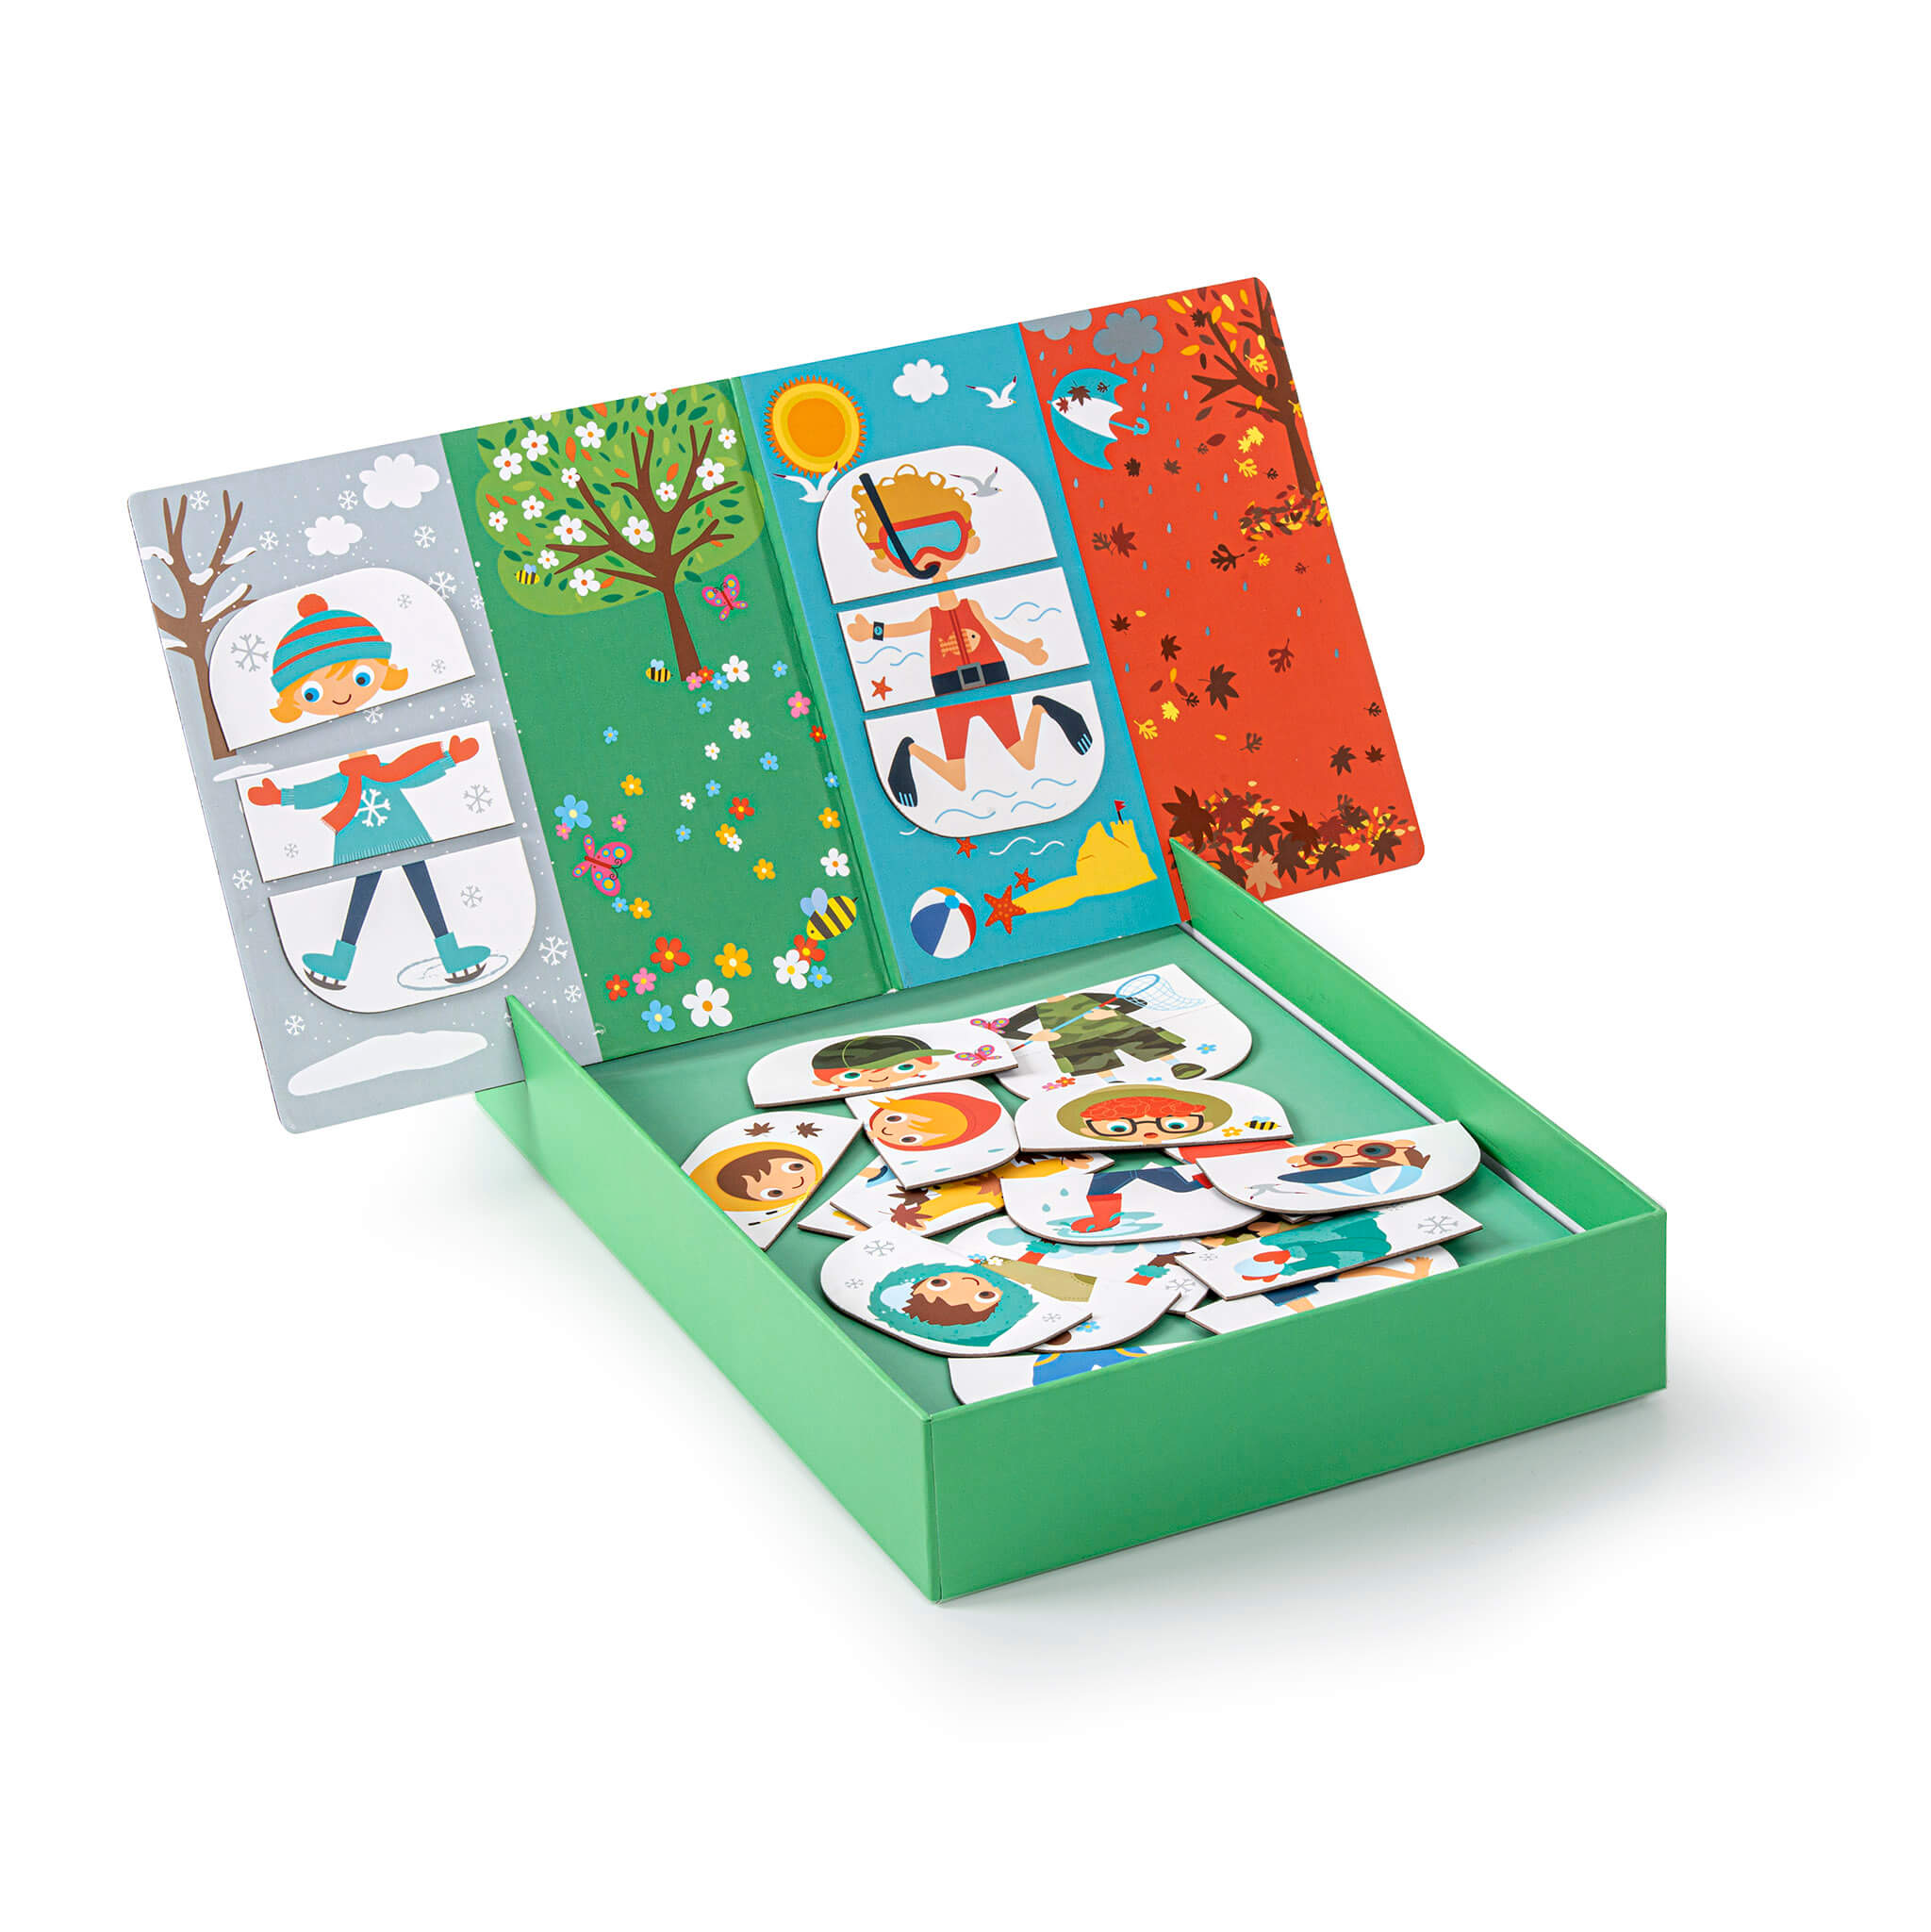 Apli Magnets Stations - 20mm - Couleurs assorties - Marquage et Organisation